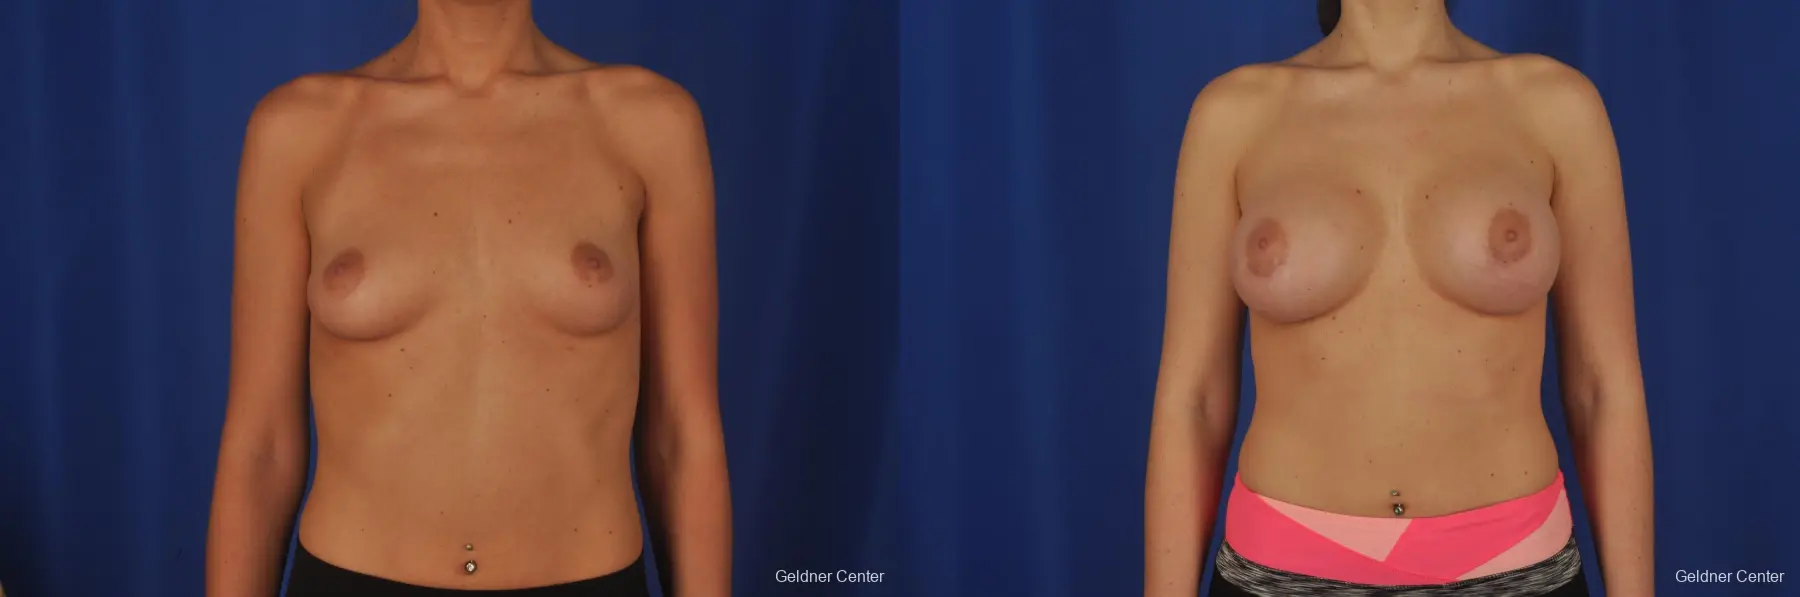 Breast Augmentation Lake Shore Dr, Chicago 2380 - Before and After 1